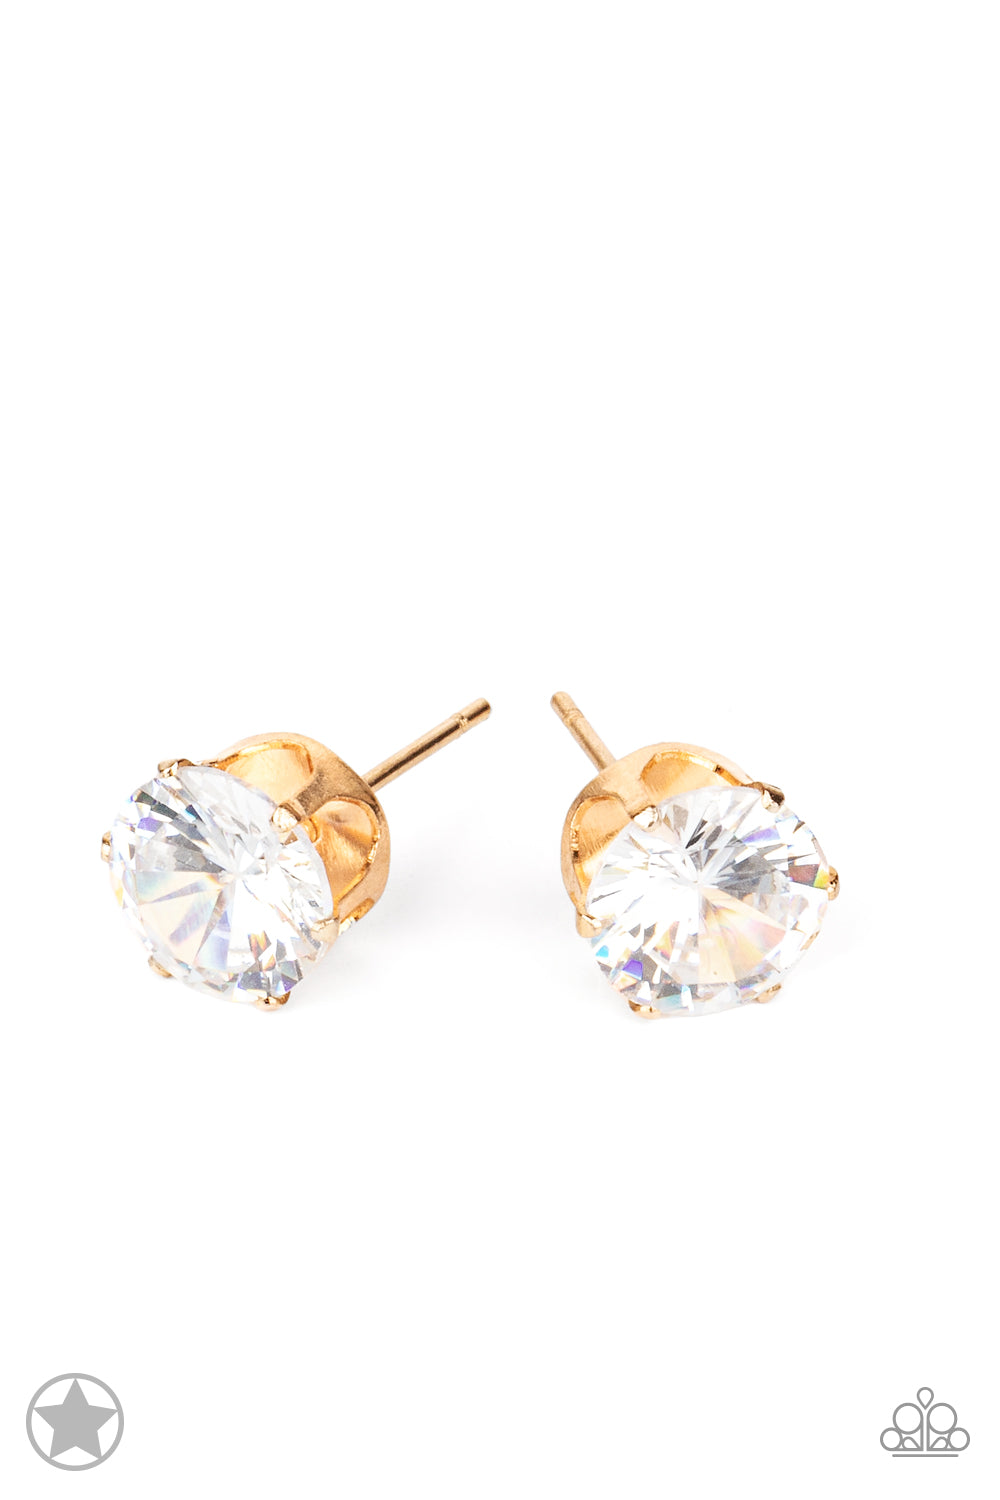 Just In TIMELESS - Gold - Paparazzi Blockbuster Earrings